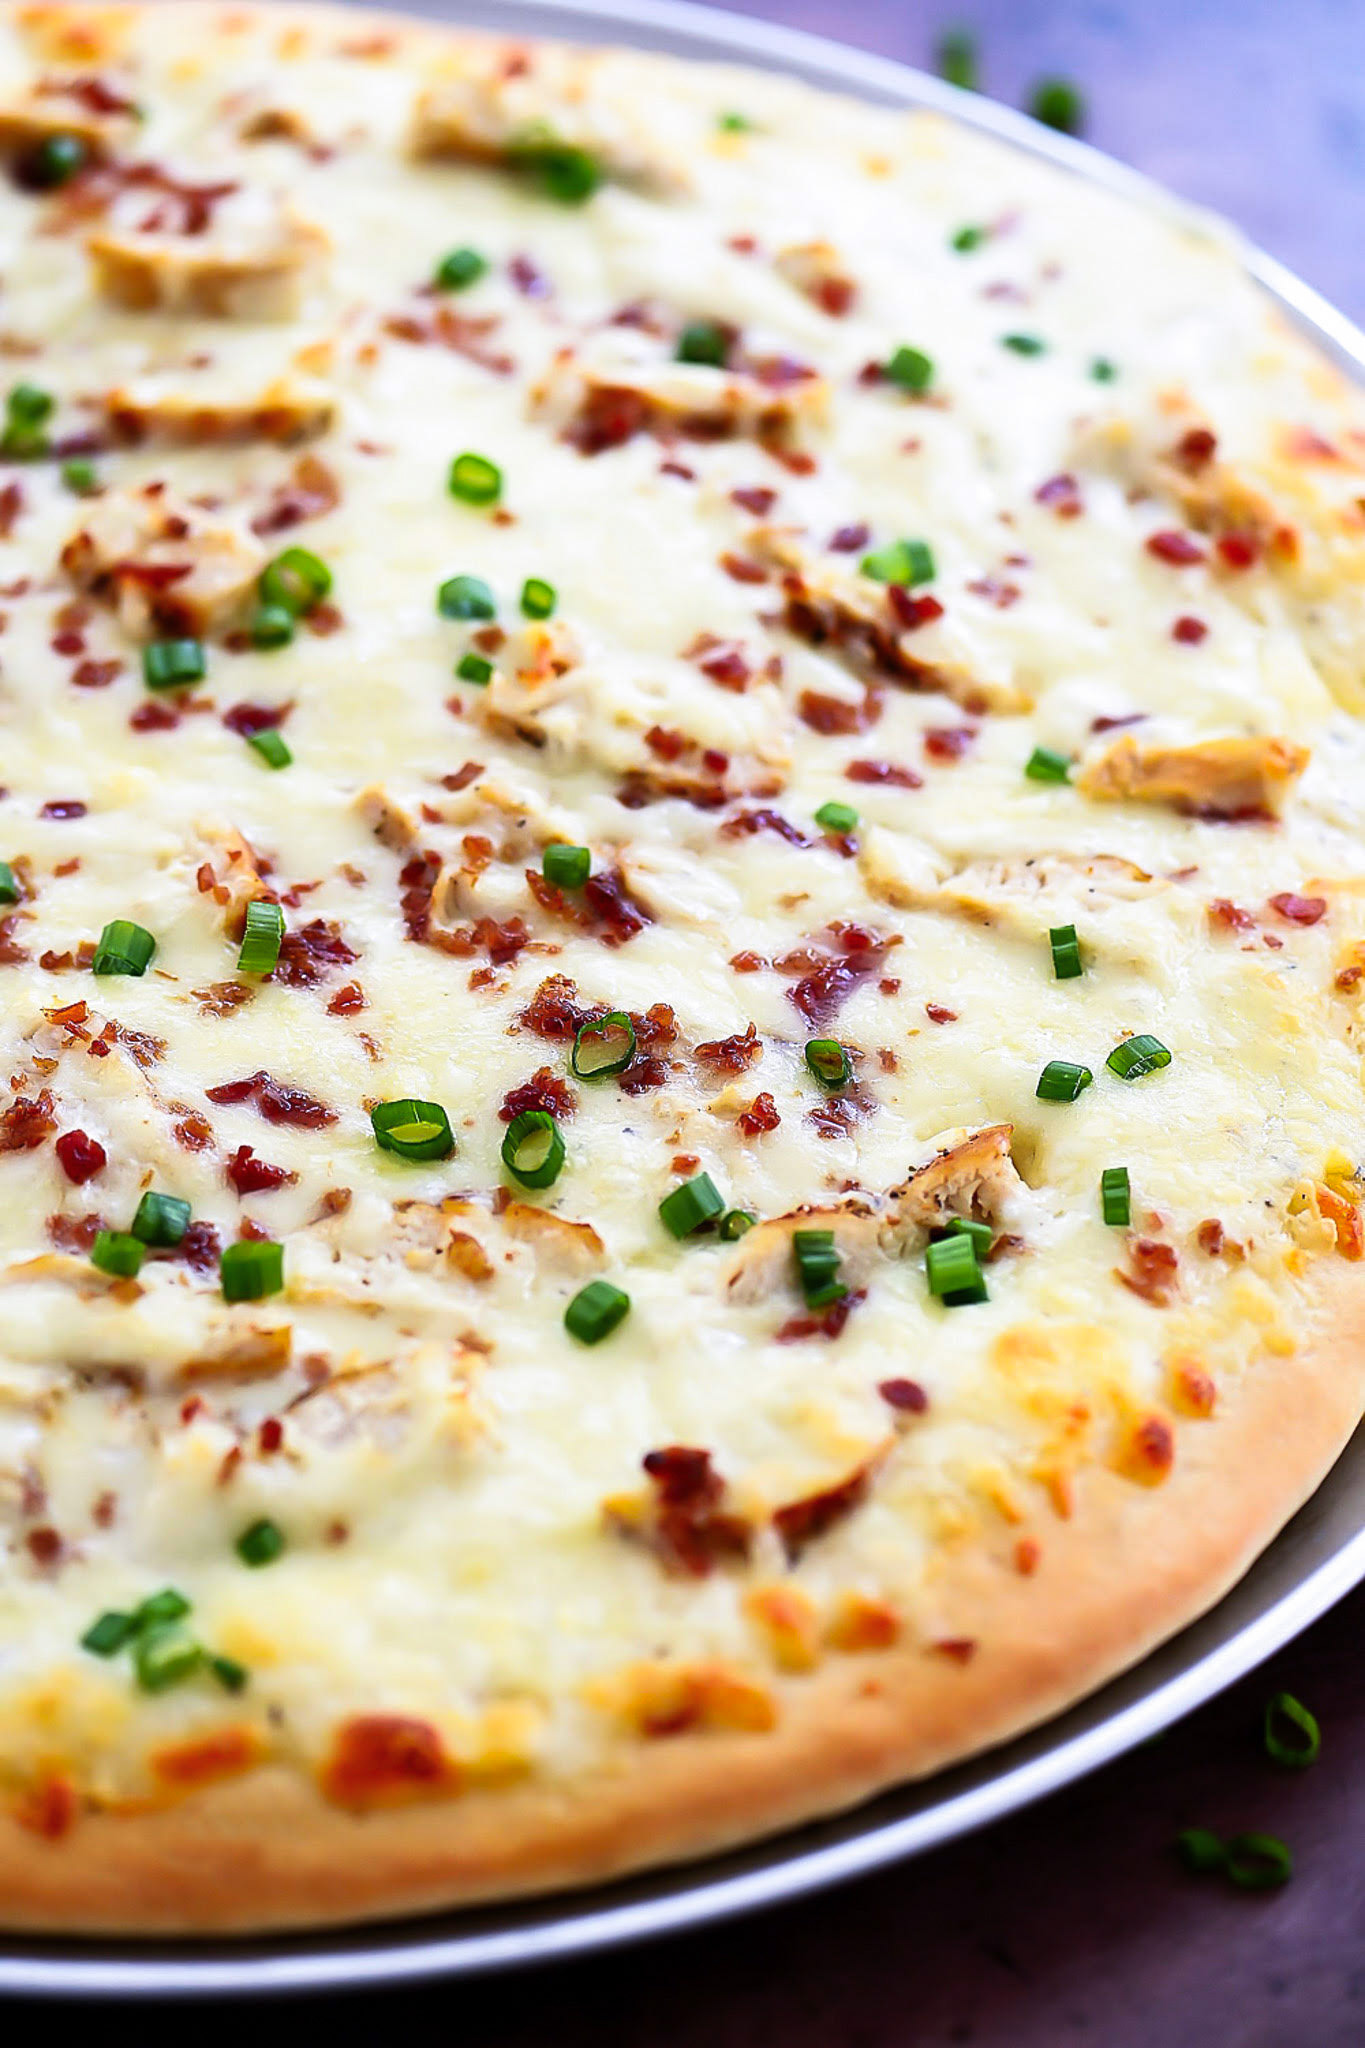 Alfredo Chicken Pizza is homemade pizza dough covered in Alfredo sauce and topped with chicken, bacon, garlic and cheese. Life-in-the-Lofthouse.com